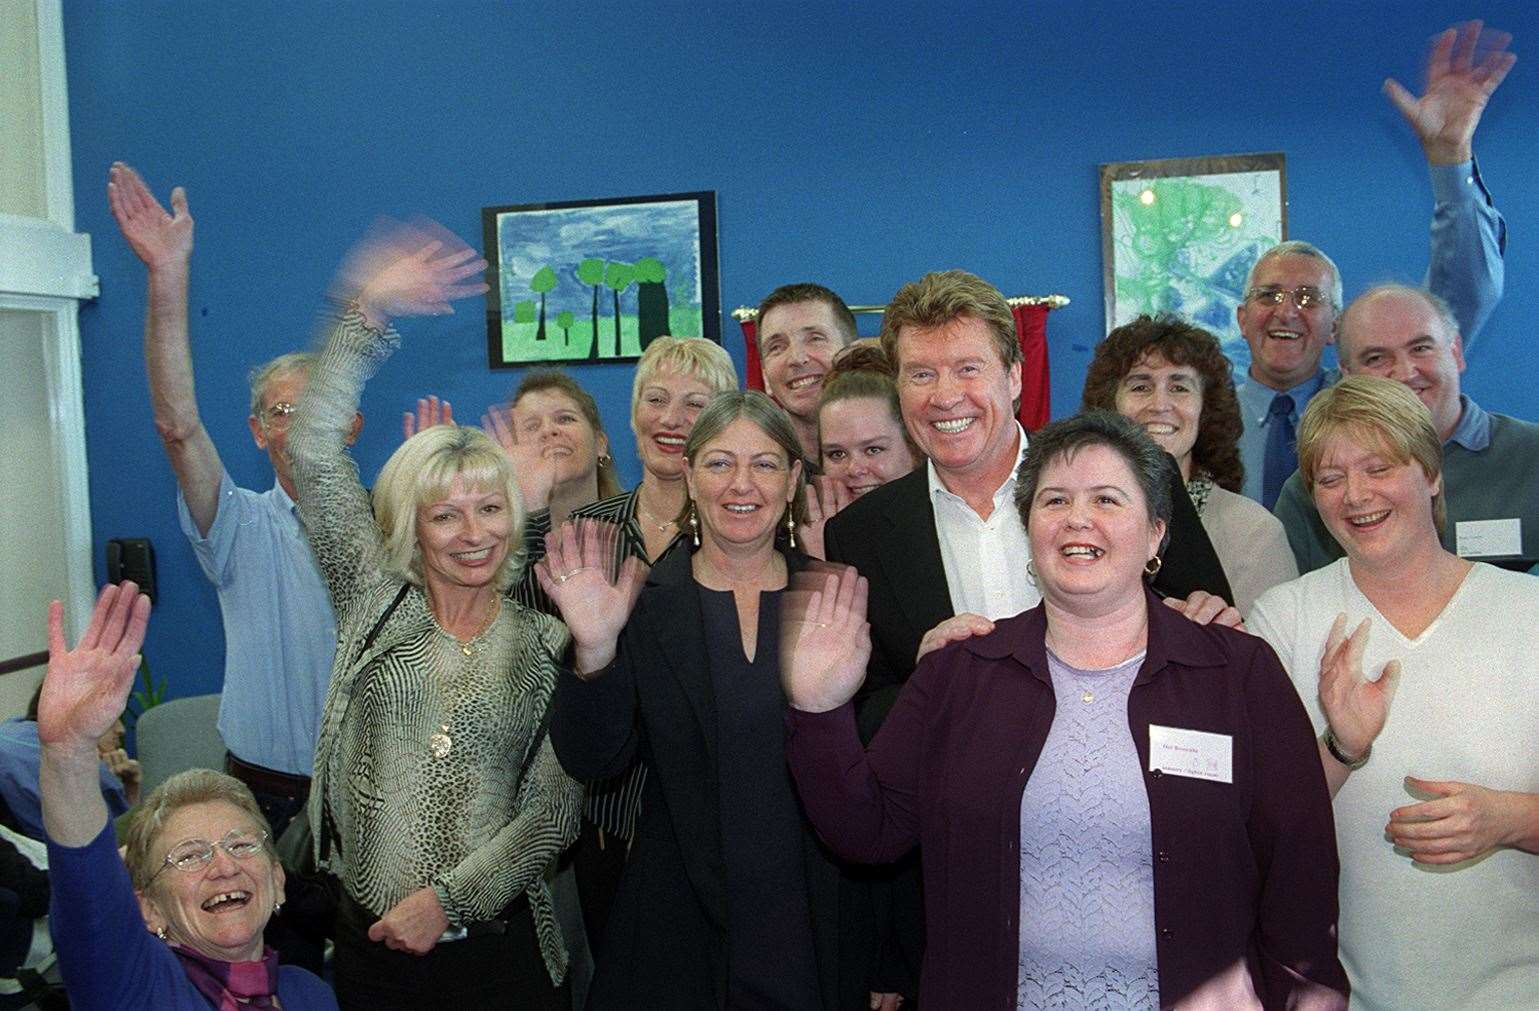 Ann Everett, pictured bottom left, invited West End star Michael Crawford to return to the Island to open the Crawford Centre which she managed, in November 2001. Picture: Kent Messenger Group